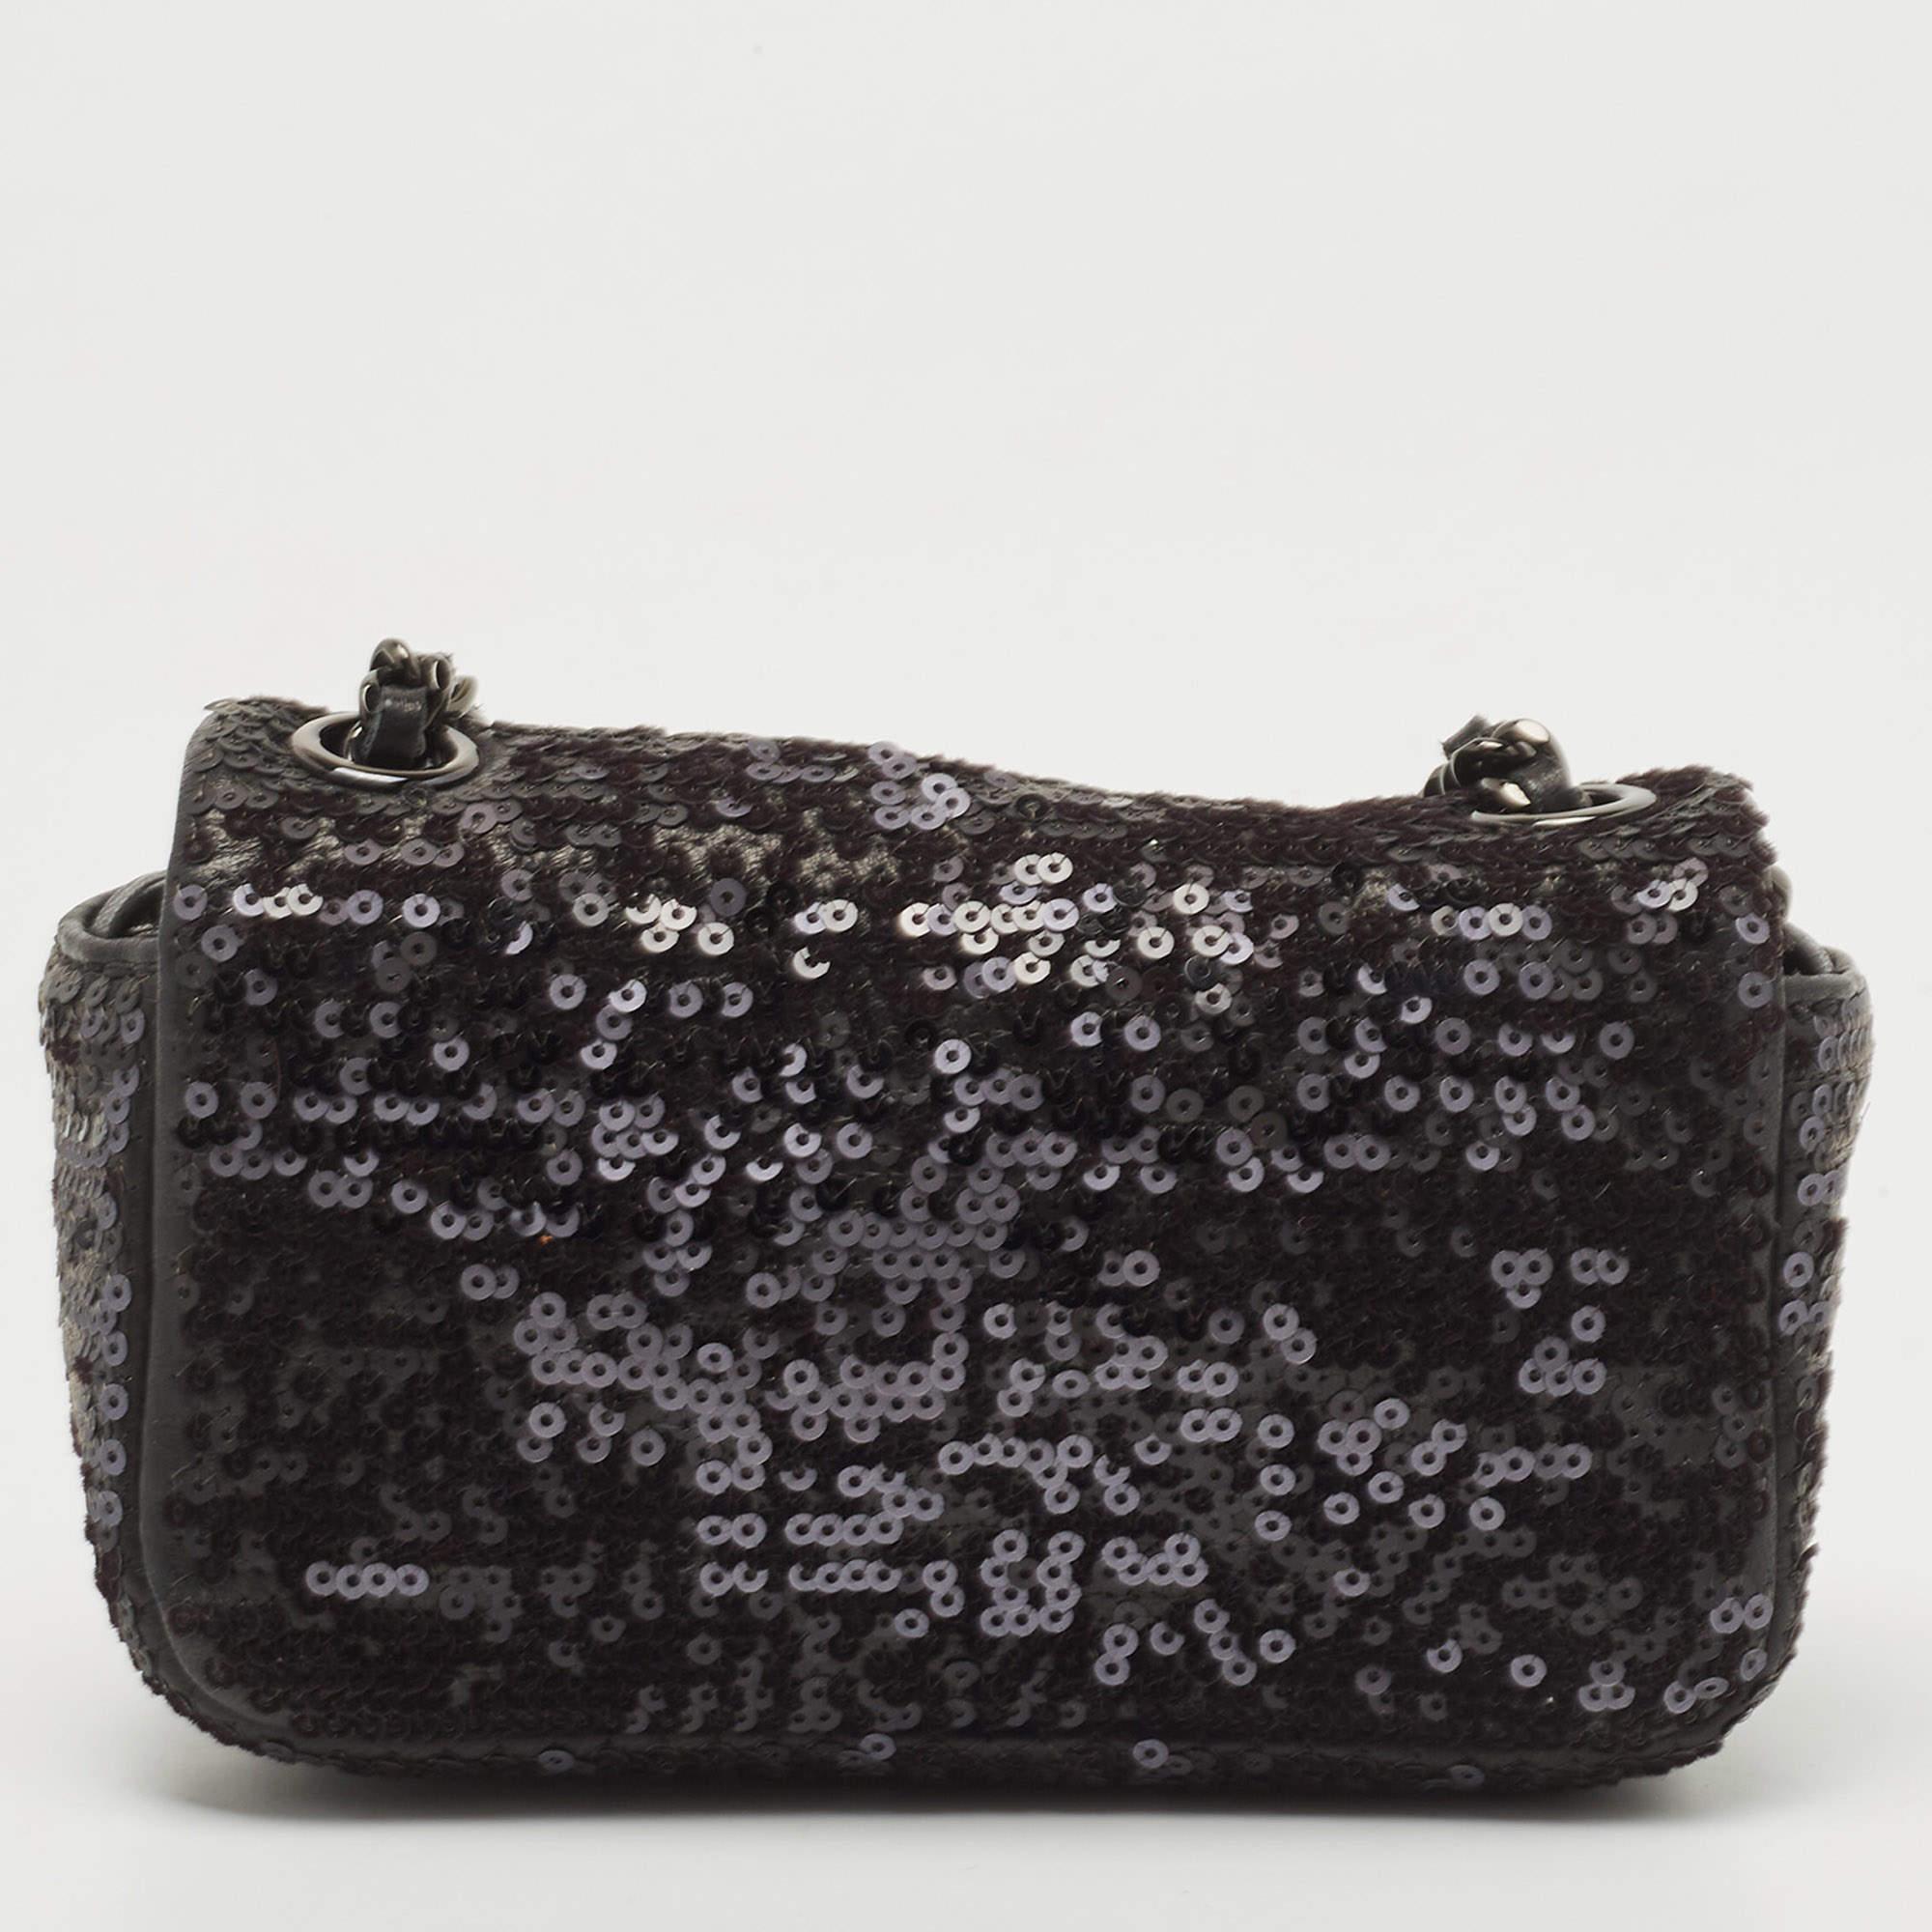 The fashion house’s tradition of excellence, coupled with modern design sensibilities, works to make this Chanel Mini Single Flap bag one of a kind. It's a fabulous accessory for everyday use.

Includes: Authenticity Card, Info Booklet